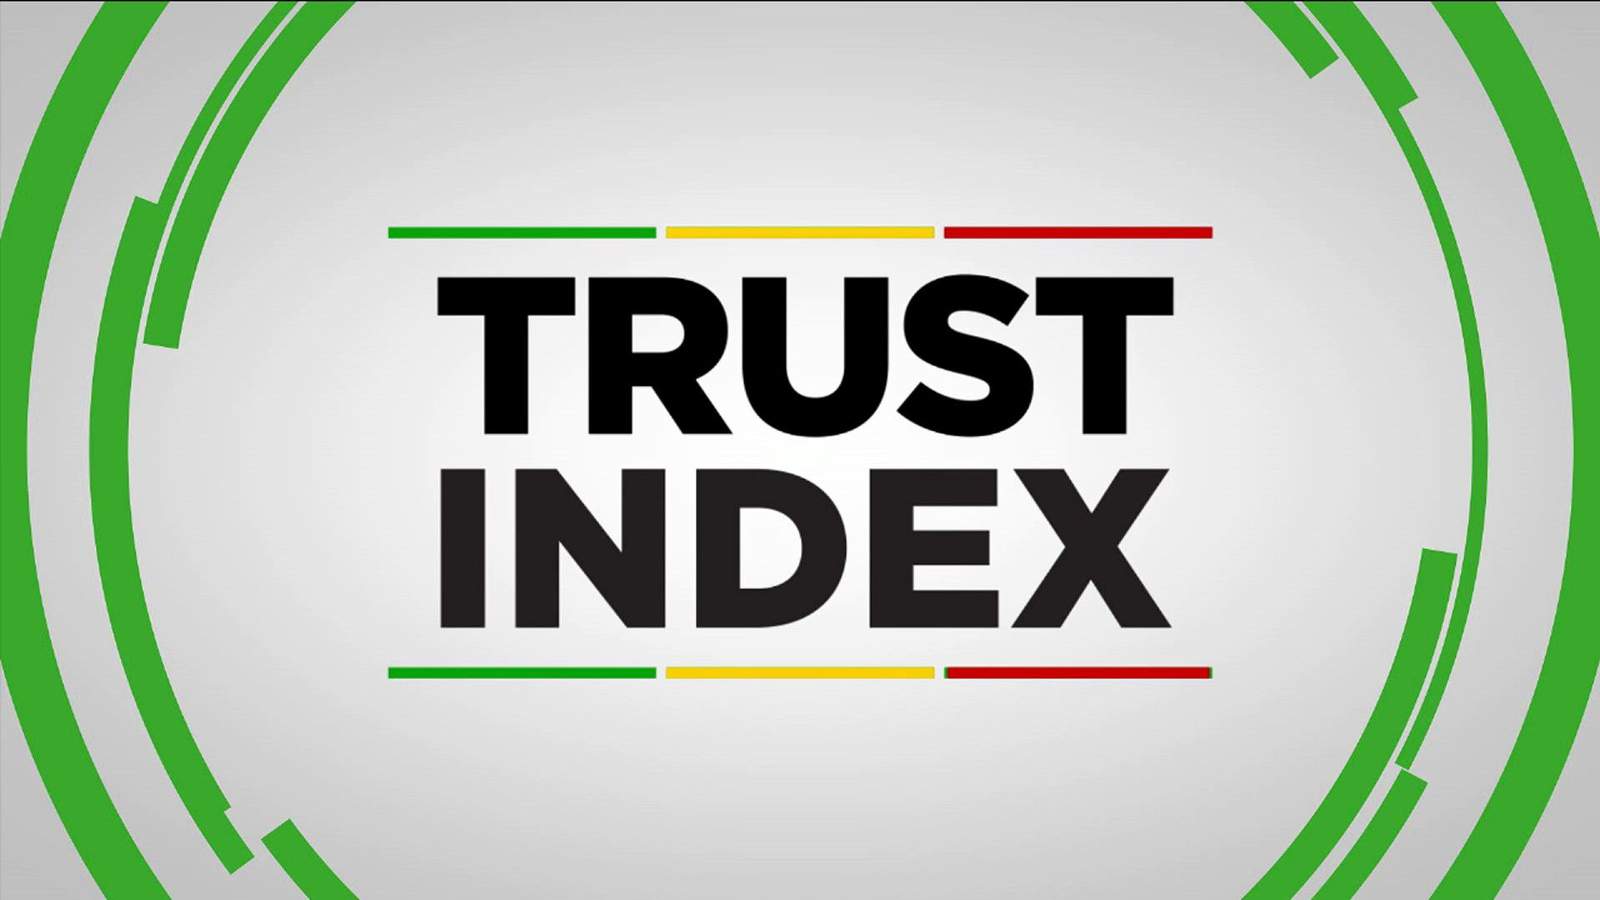 TRUST INDEX: Here’s a look at the biggest claims News 6 fact-checked in 2020